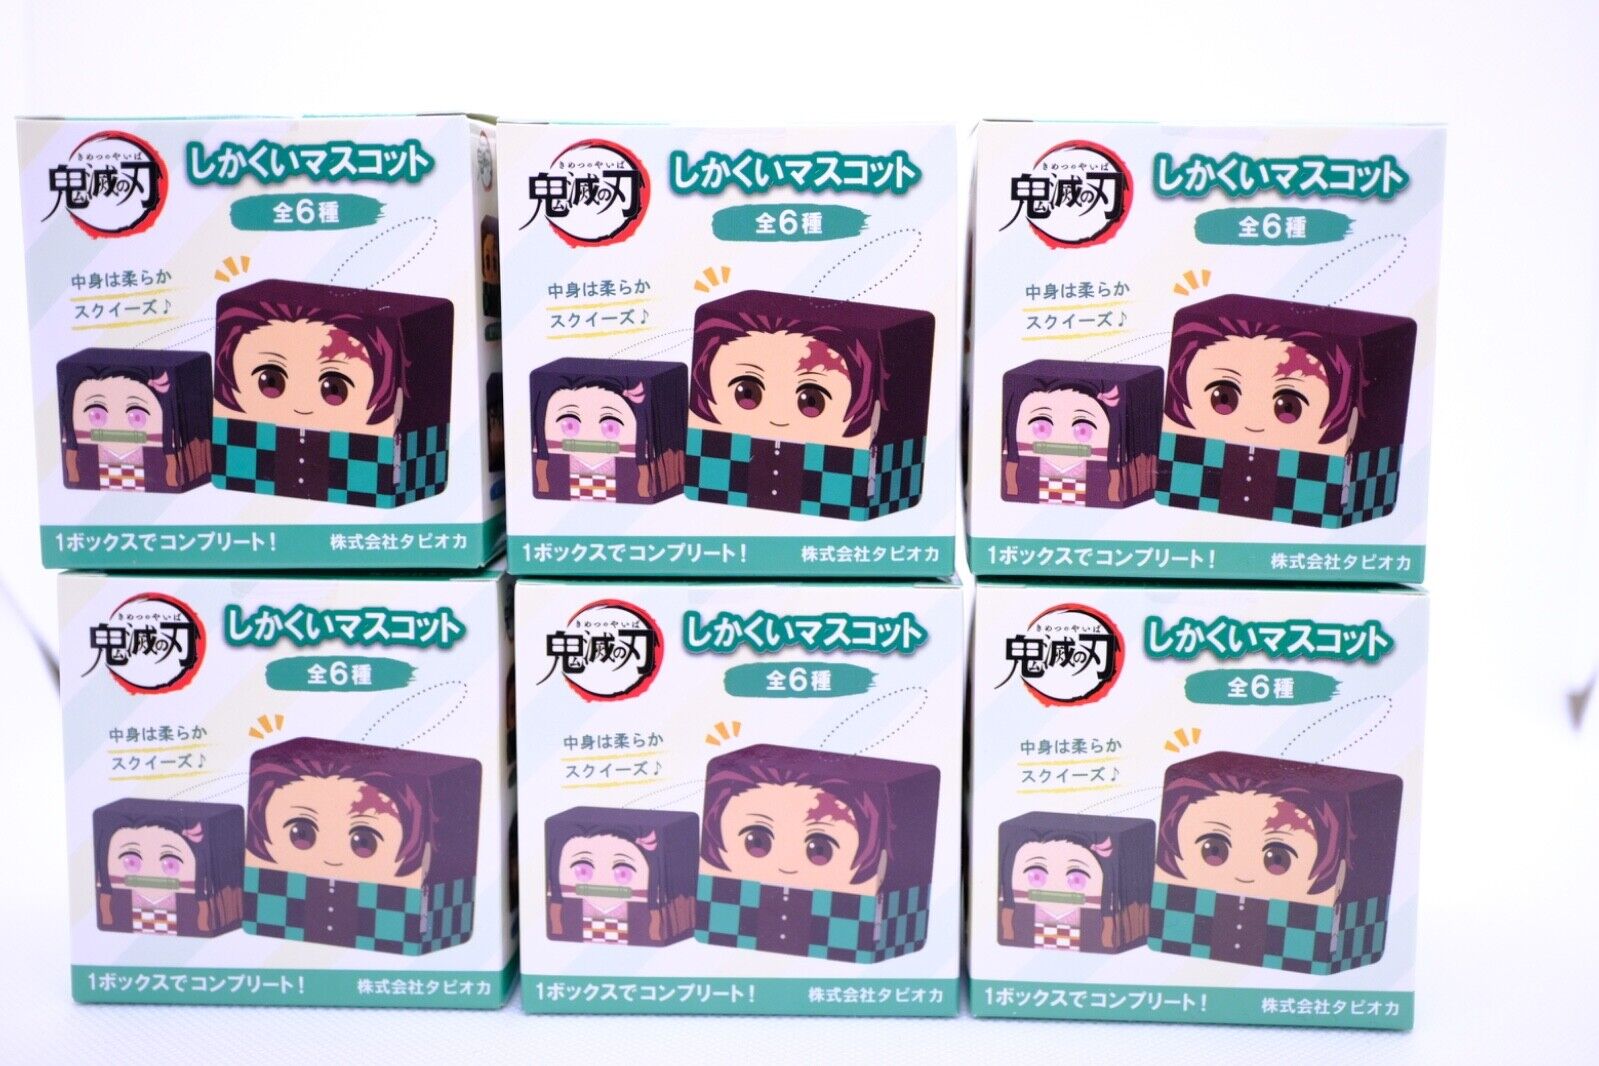 Kimetsu No Yaiba complete set of 6square characters no over lapping and unopened